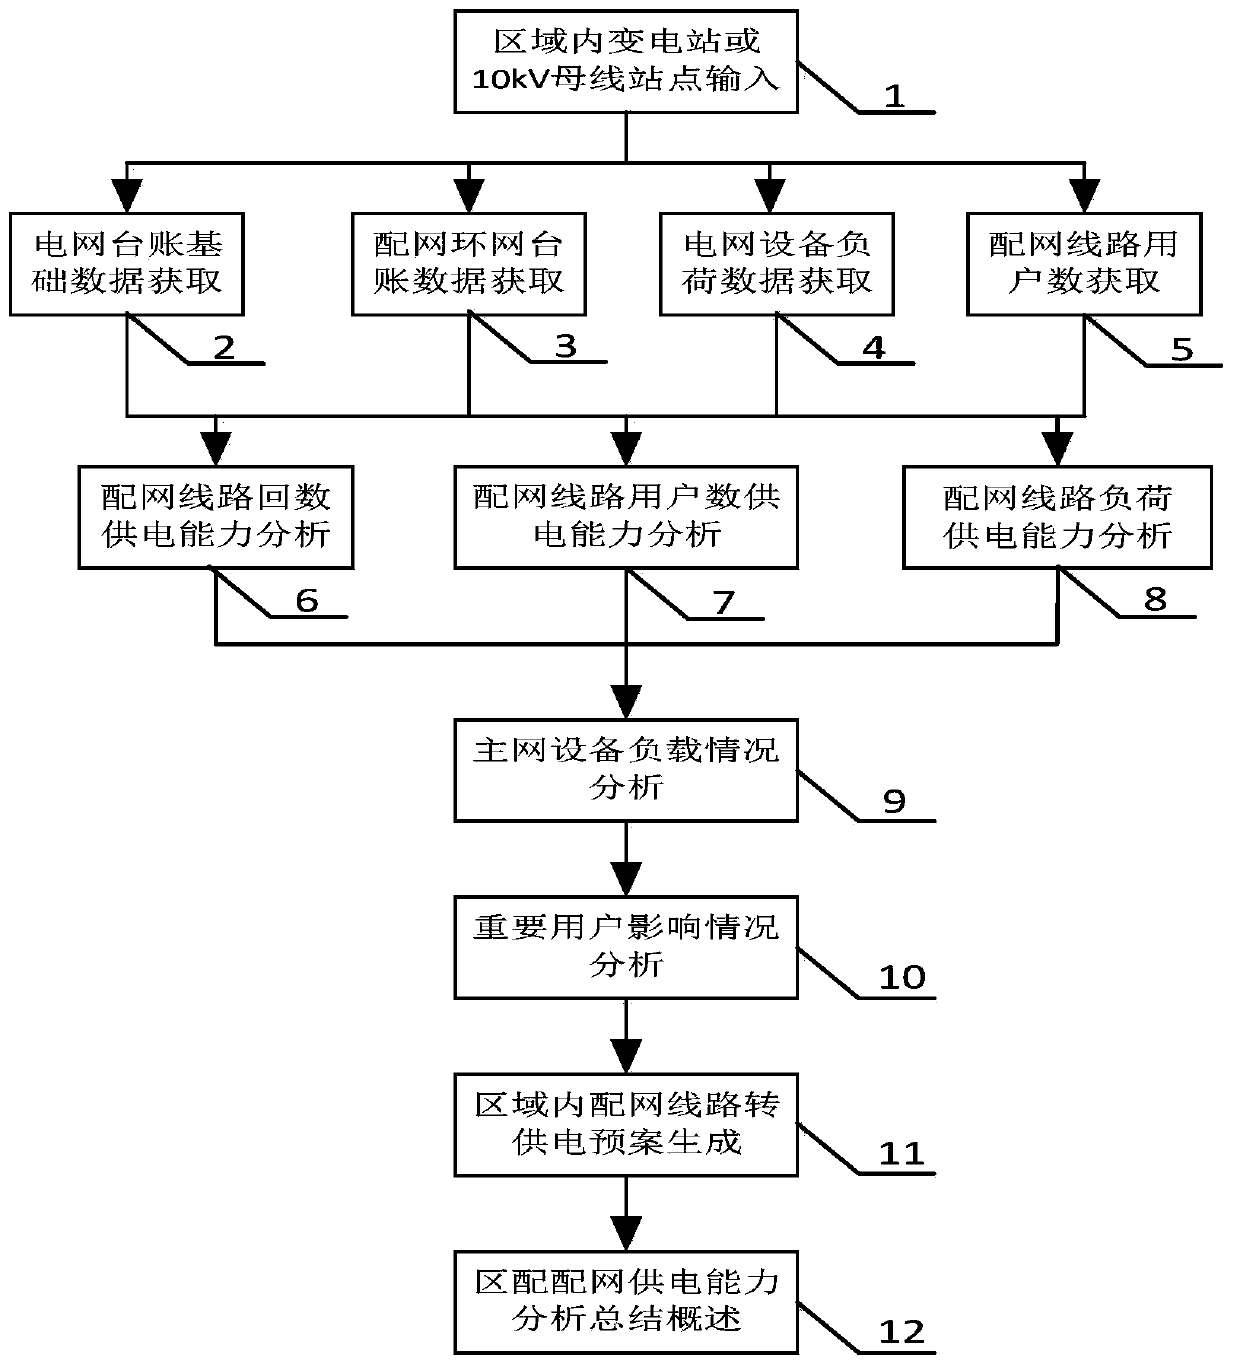 Analysis method for setting distribution network line looped network points in user assets